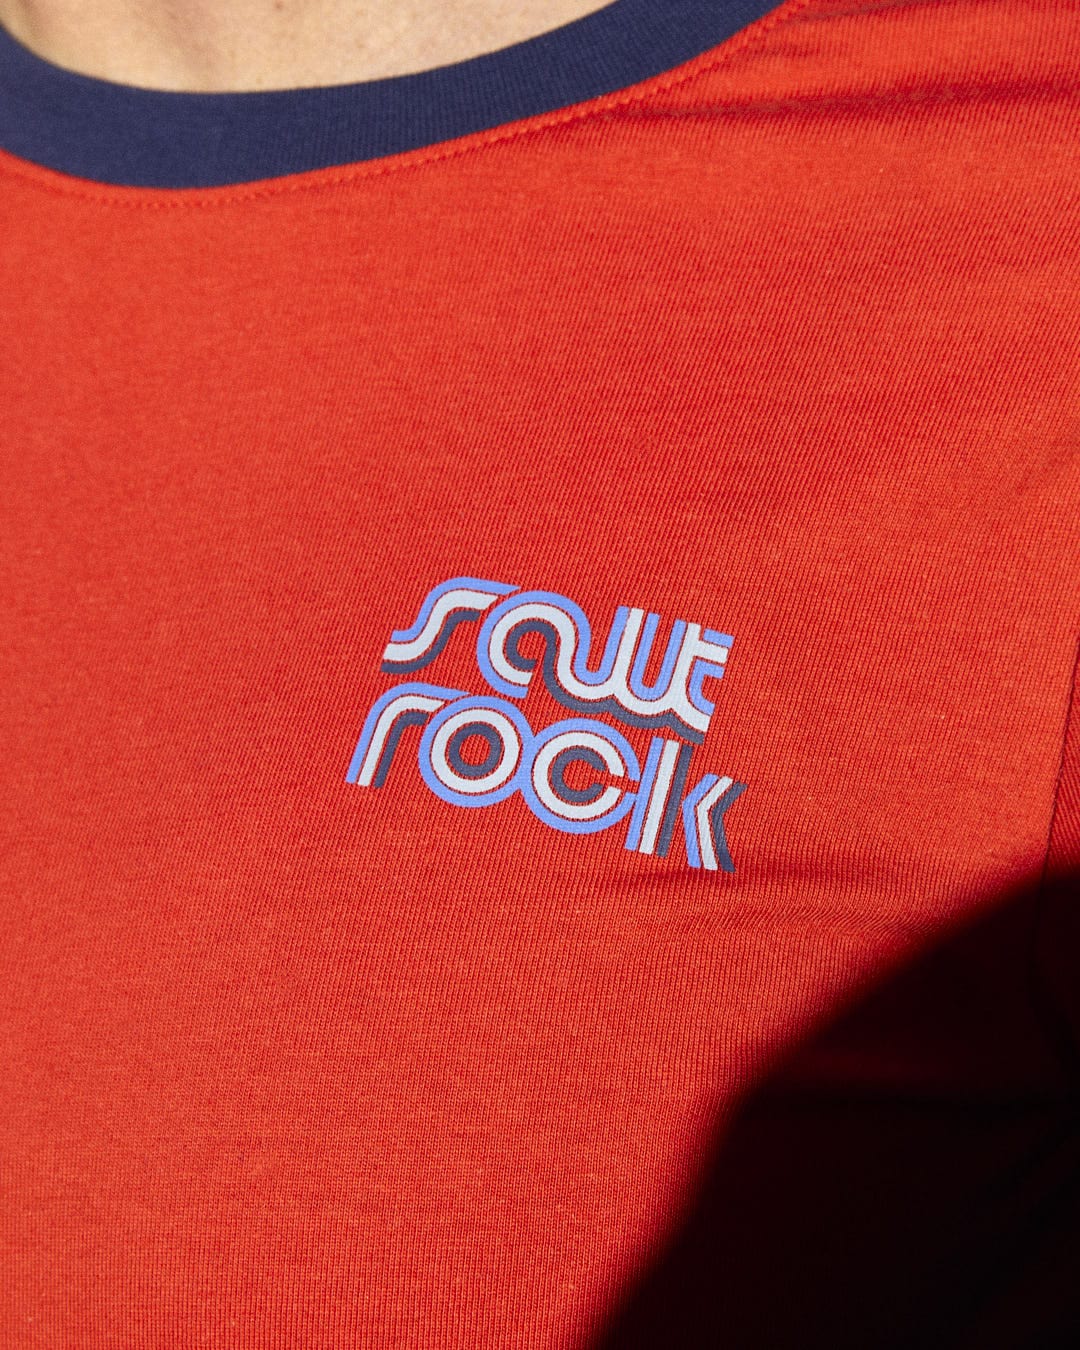 A man wearing a Retro Wave Mini red t-shirt with the Saltrock branding and the words "save rock" on it.